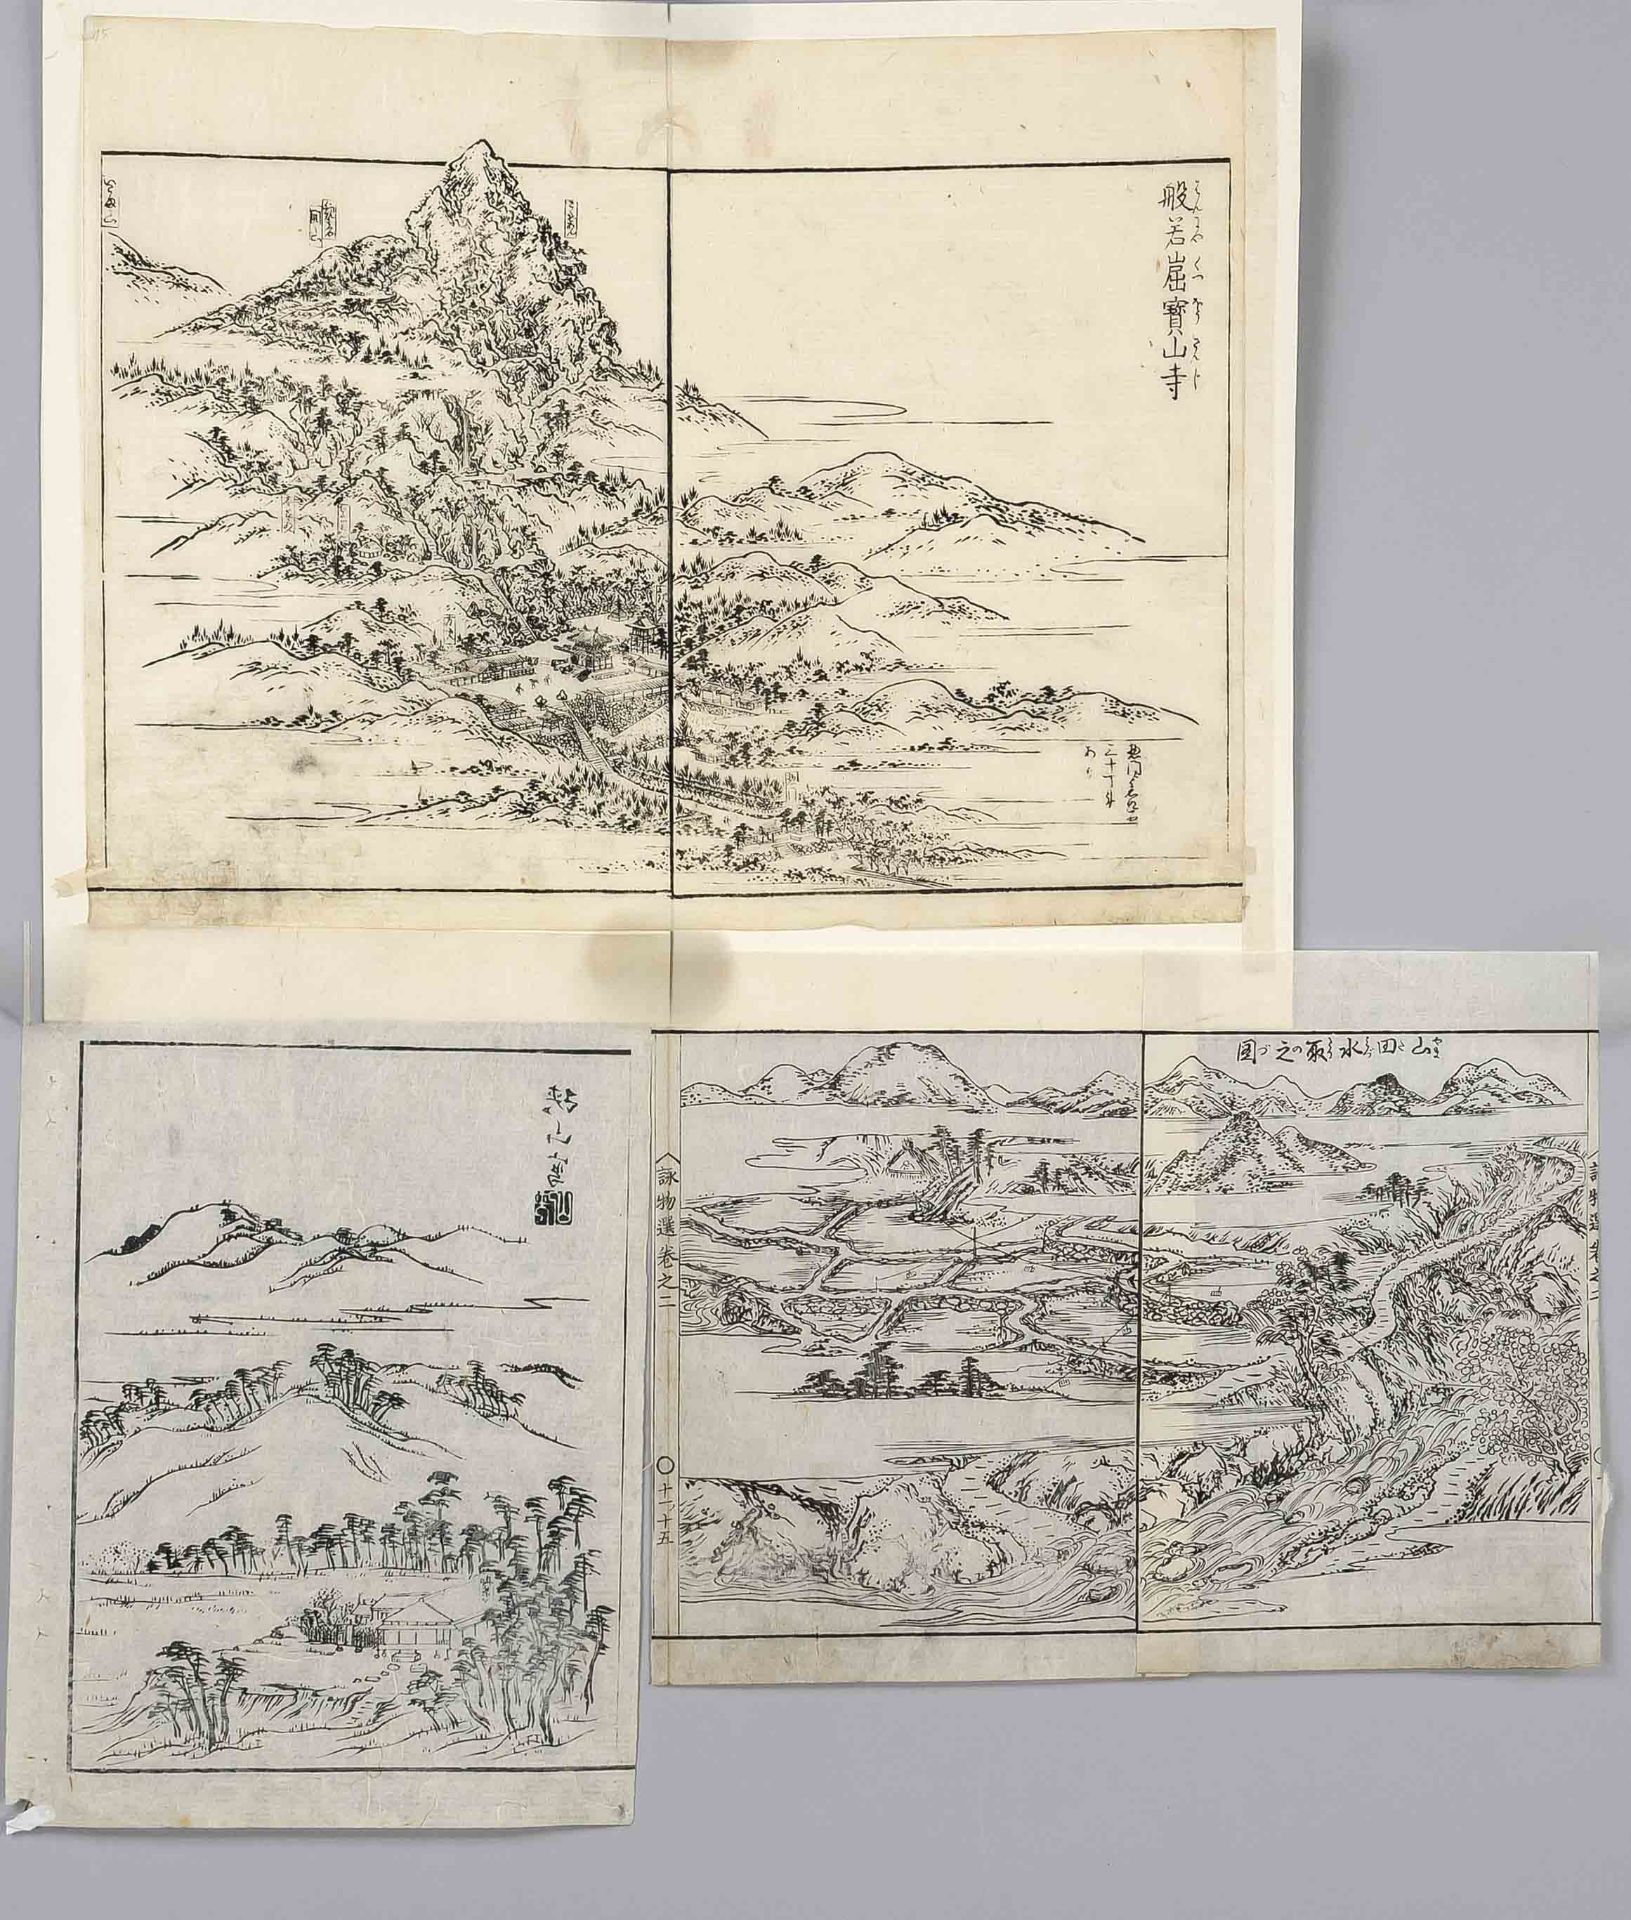 3 woodblock prints, Japan 19th century, inscribed ''Ando Hiroschige'', up to 35 x 26 cm